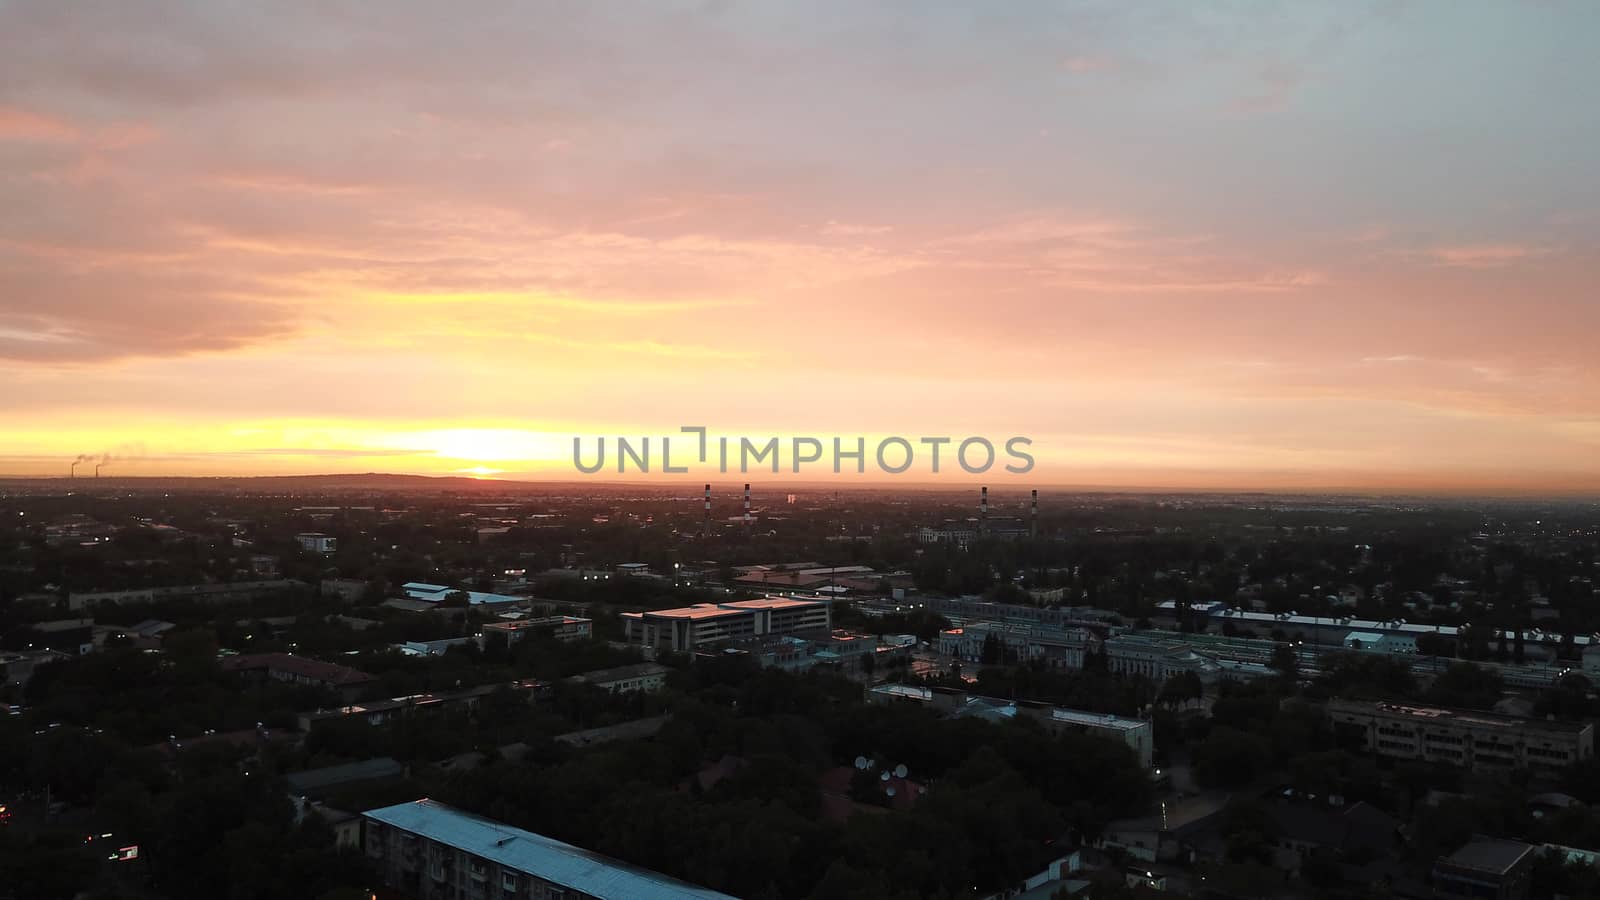 Red sunset over the city of Almaty. Clouds shimmer with different colors from yellow-red to blue. The city is plunged into darkness. Night falls. Lights are on, cars are driving. The view from the top